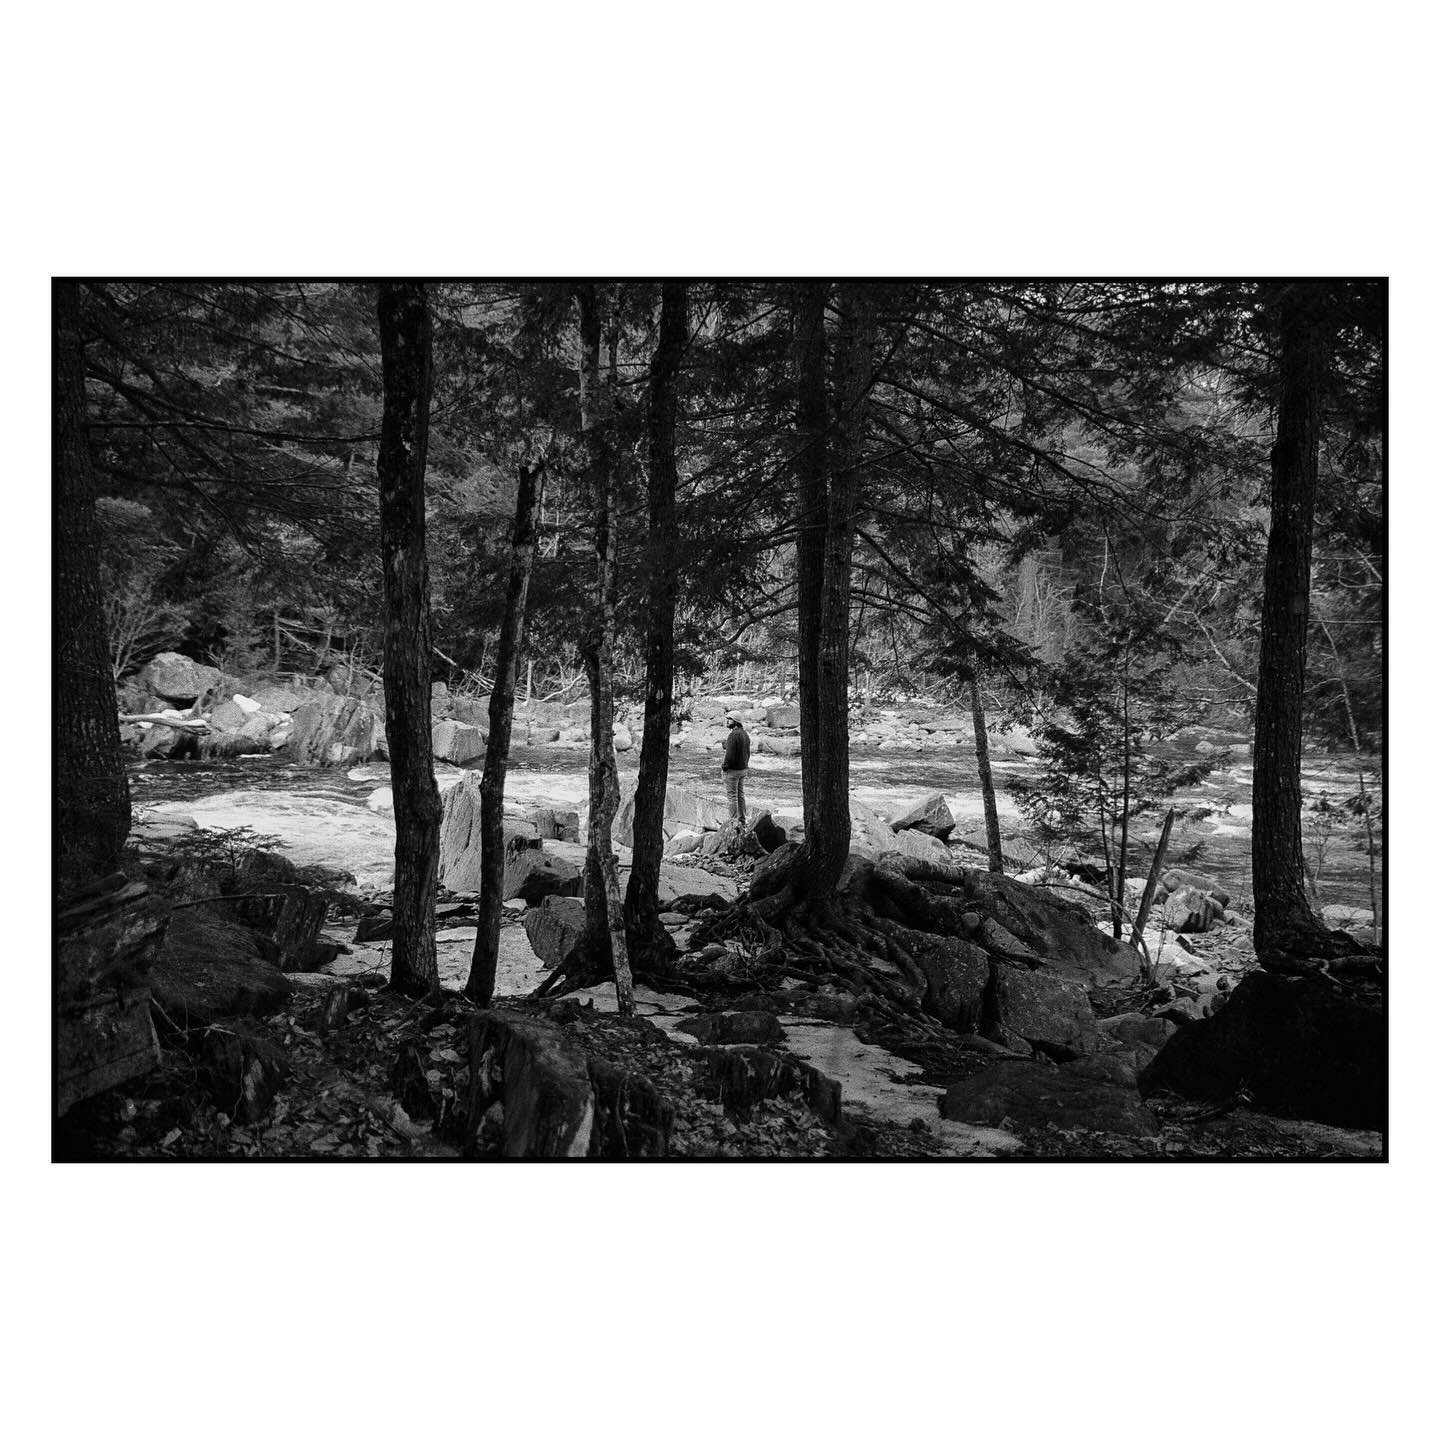 Piscataquis on film, March 2024 

#siennareneephotography #mainedocumentaryphotographer #northwoodsmaine #piscataquiscounty #attheriverbranch #northwoodsmainephotographer #film #mainephotographer #newenglandphotographer #fun #getoutside #35mm #ilford